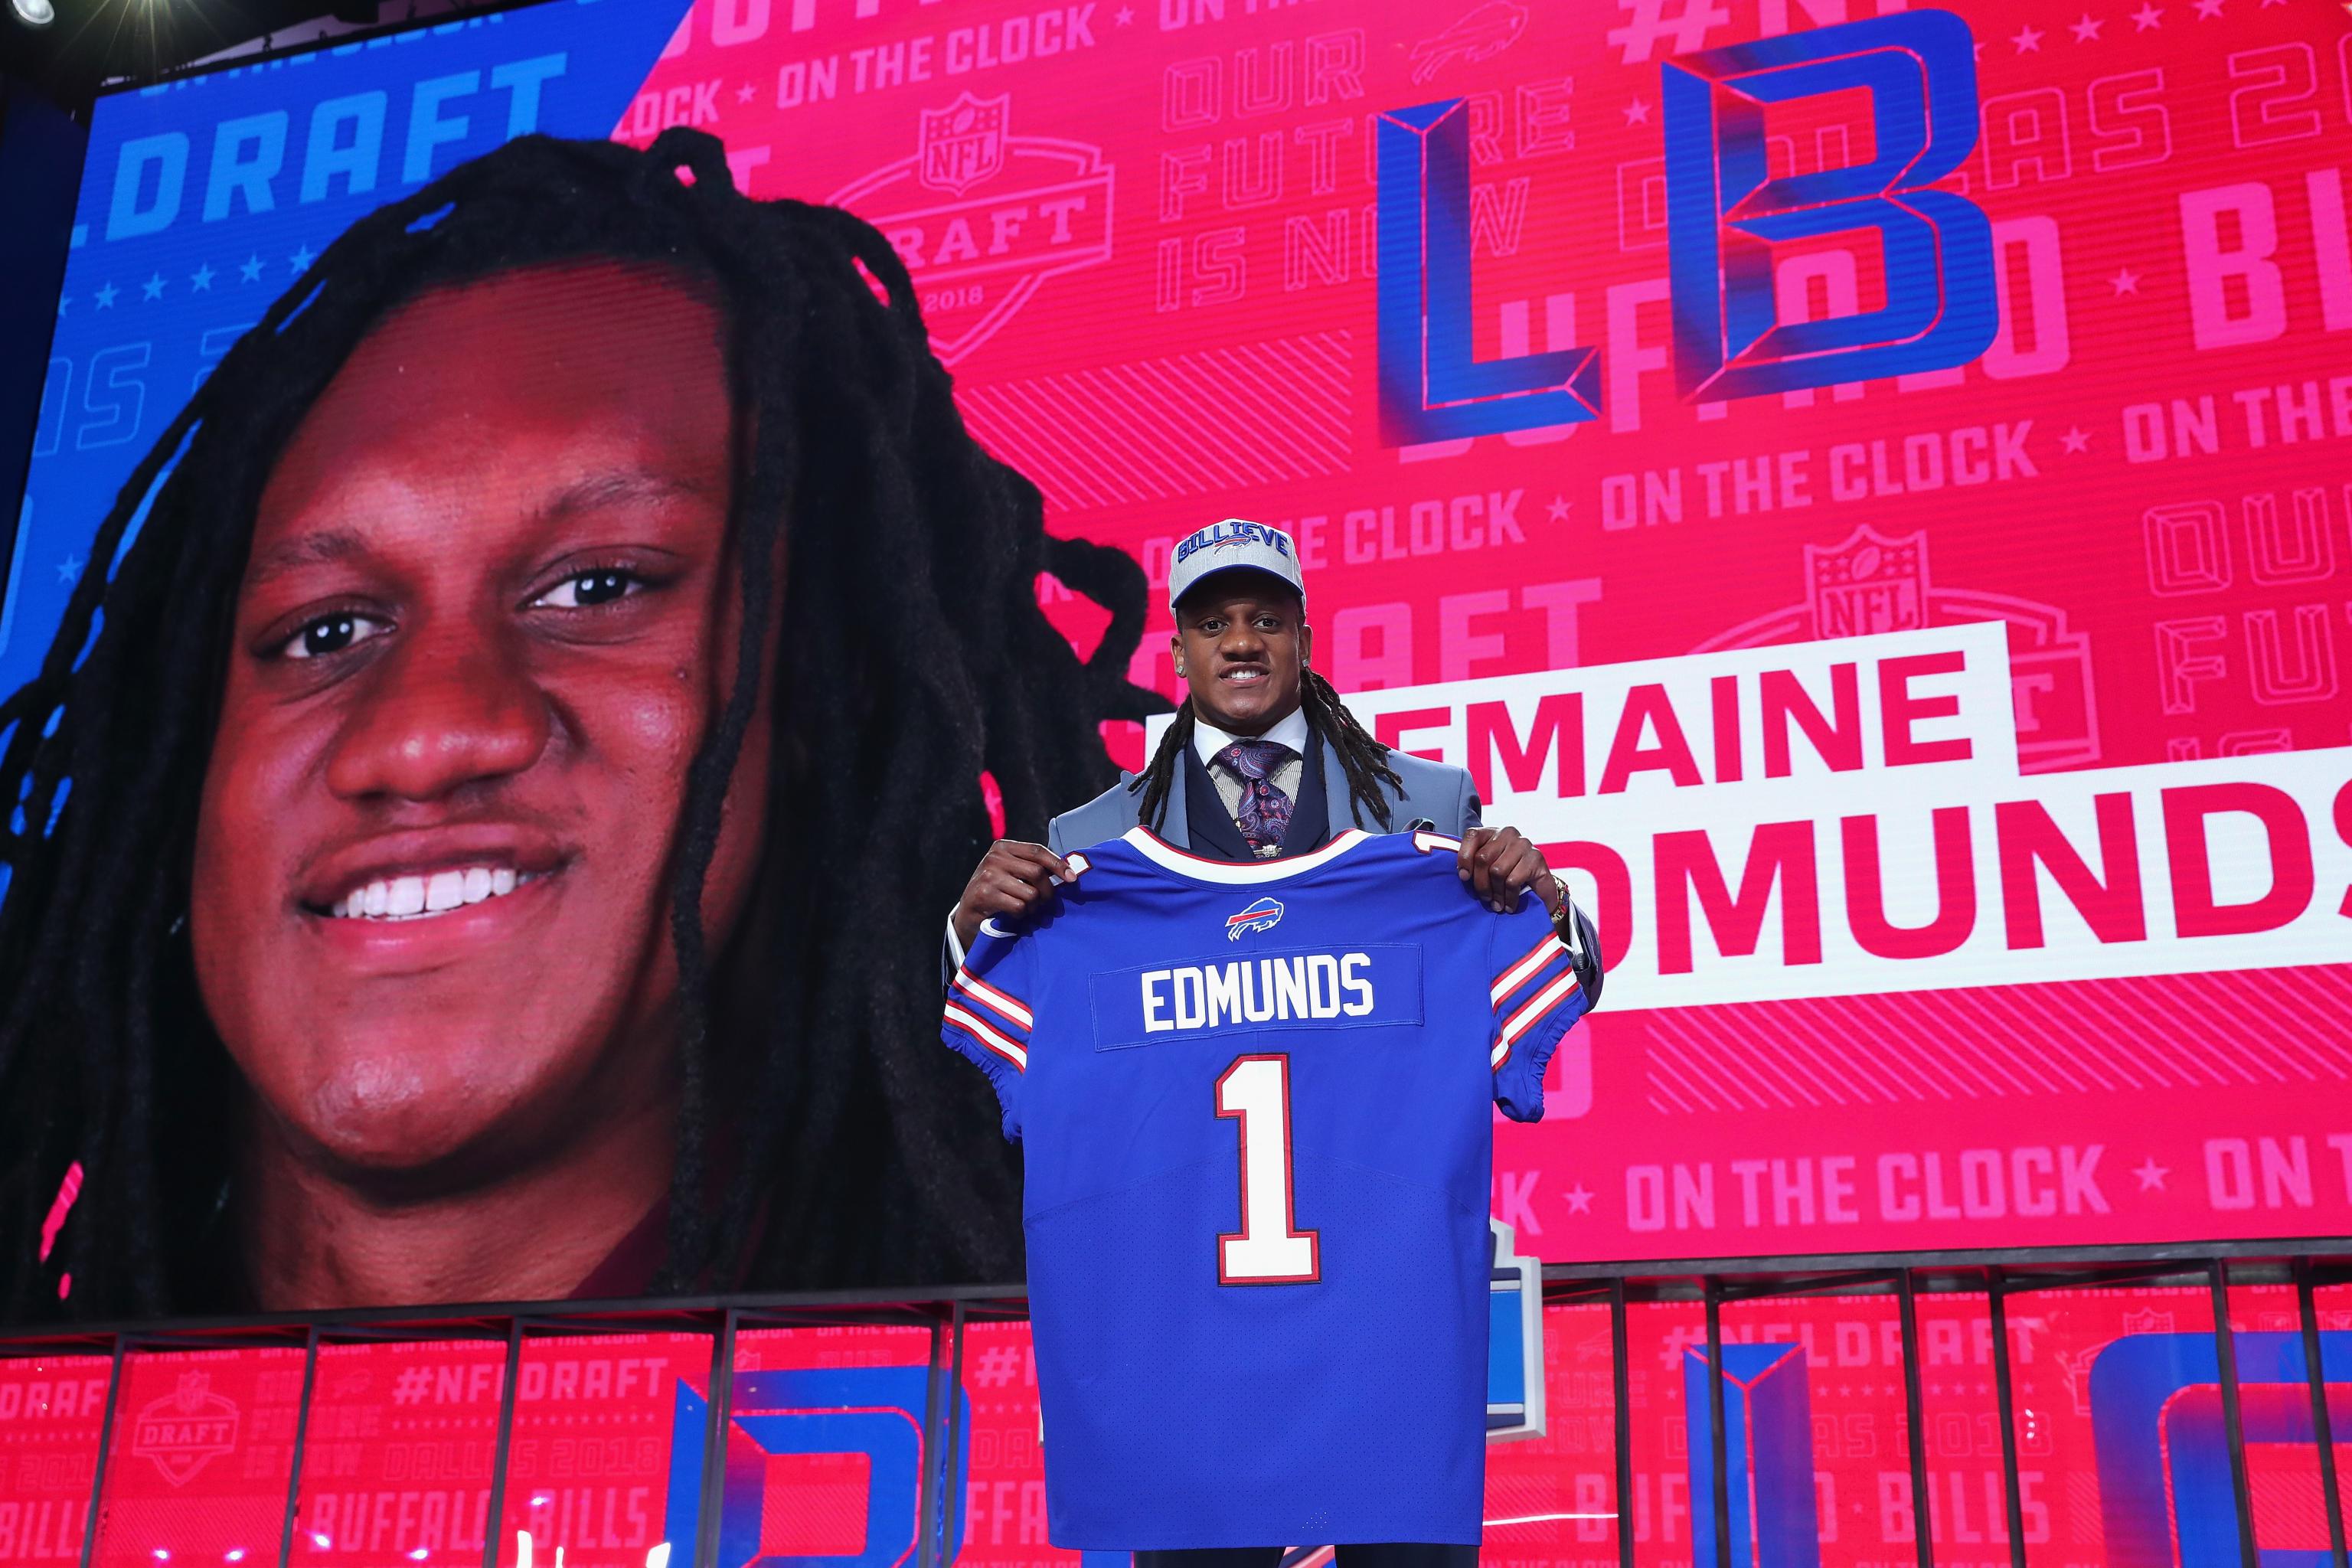 Bills rookie Edmunds has made great strides this season